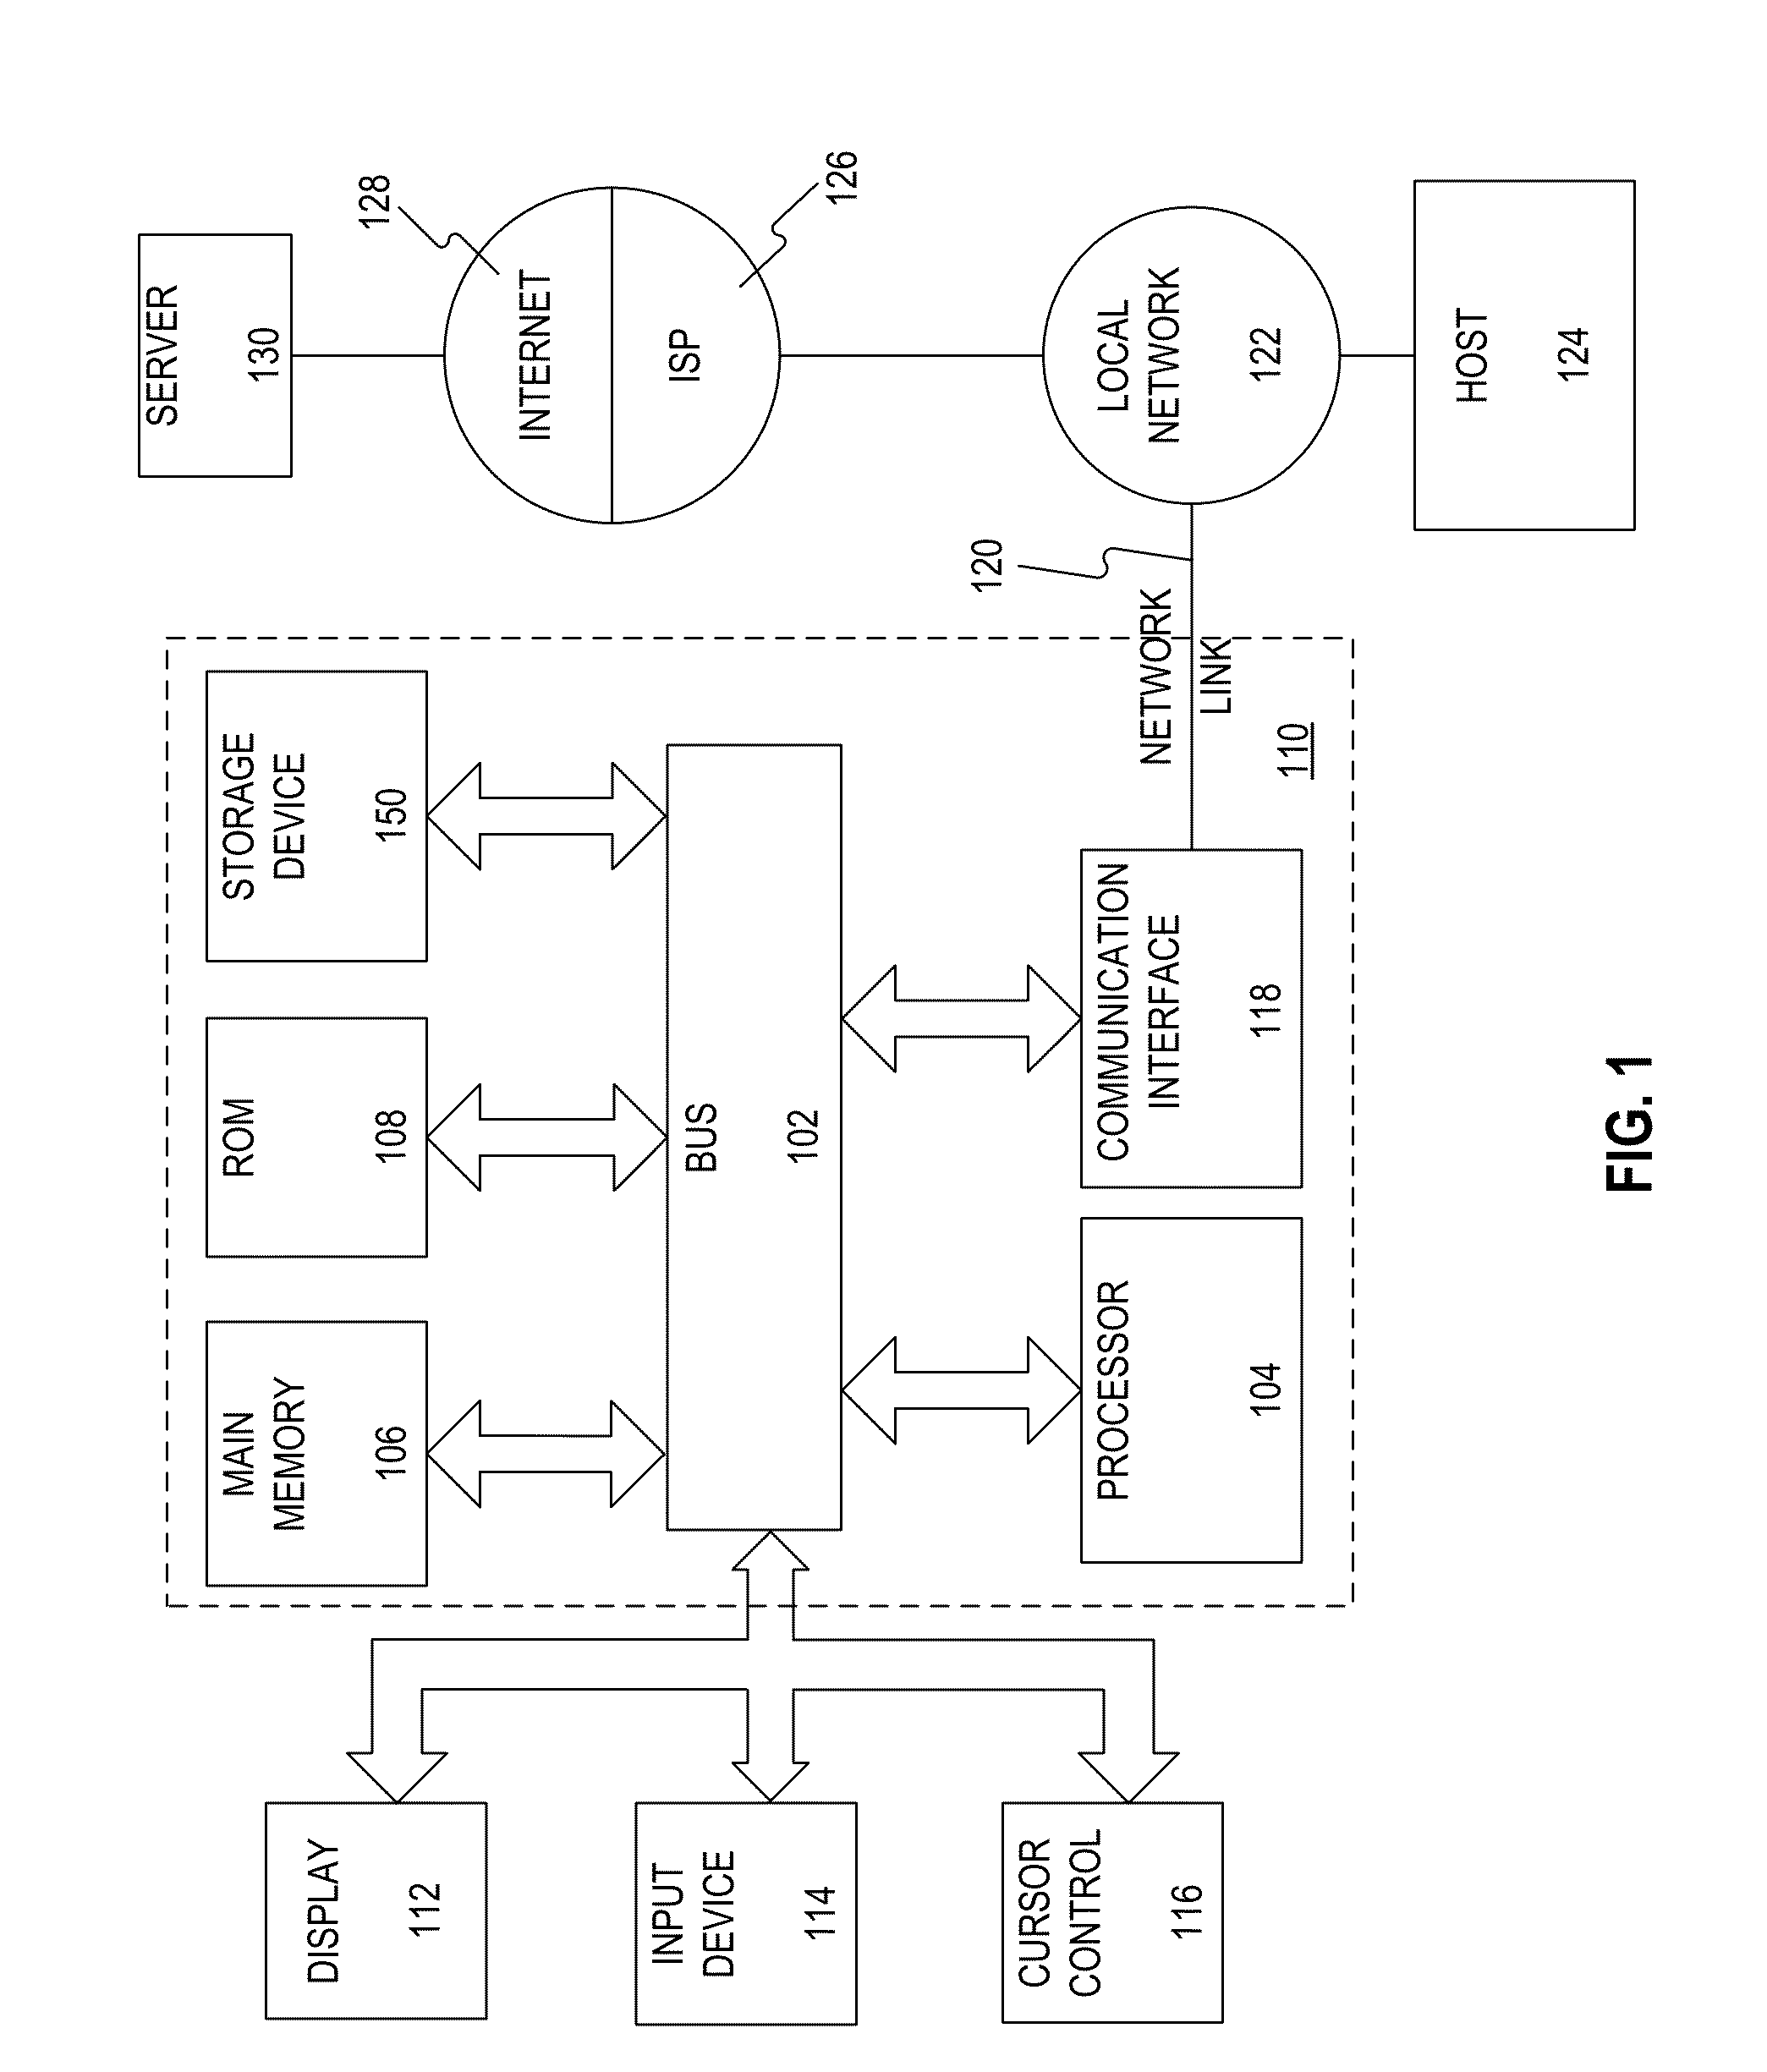 System and method for news events detection and visualization